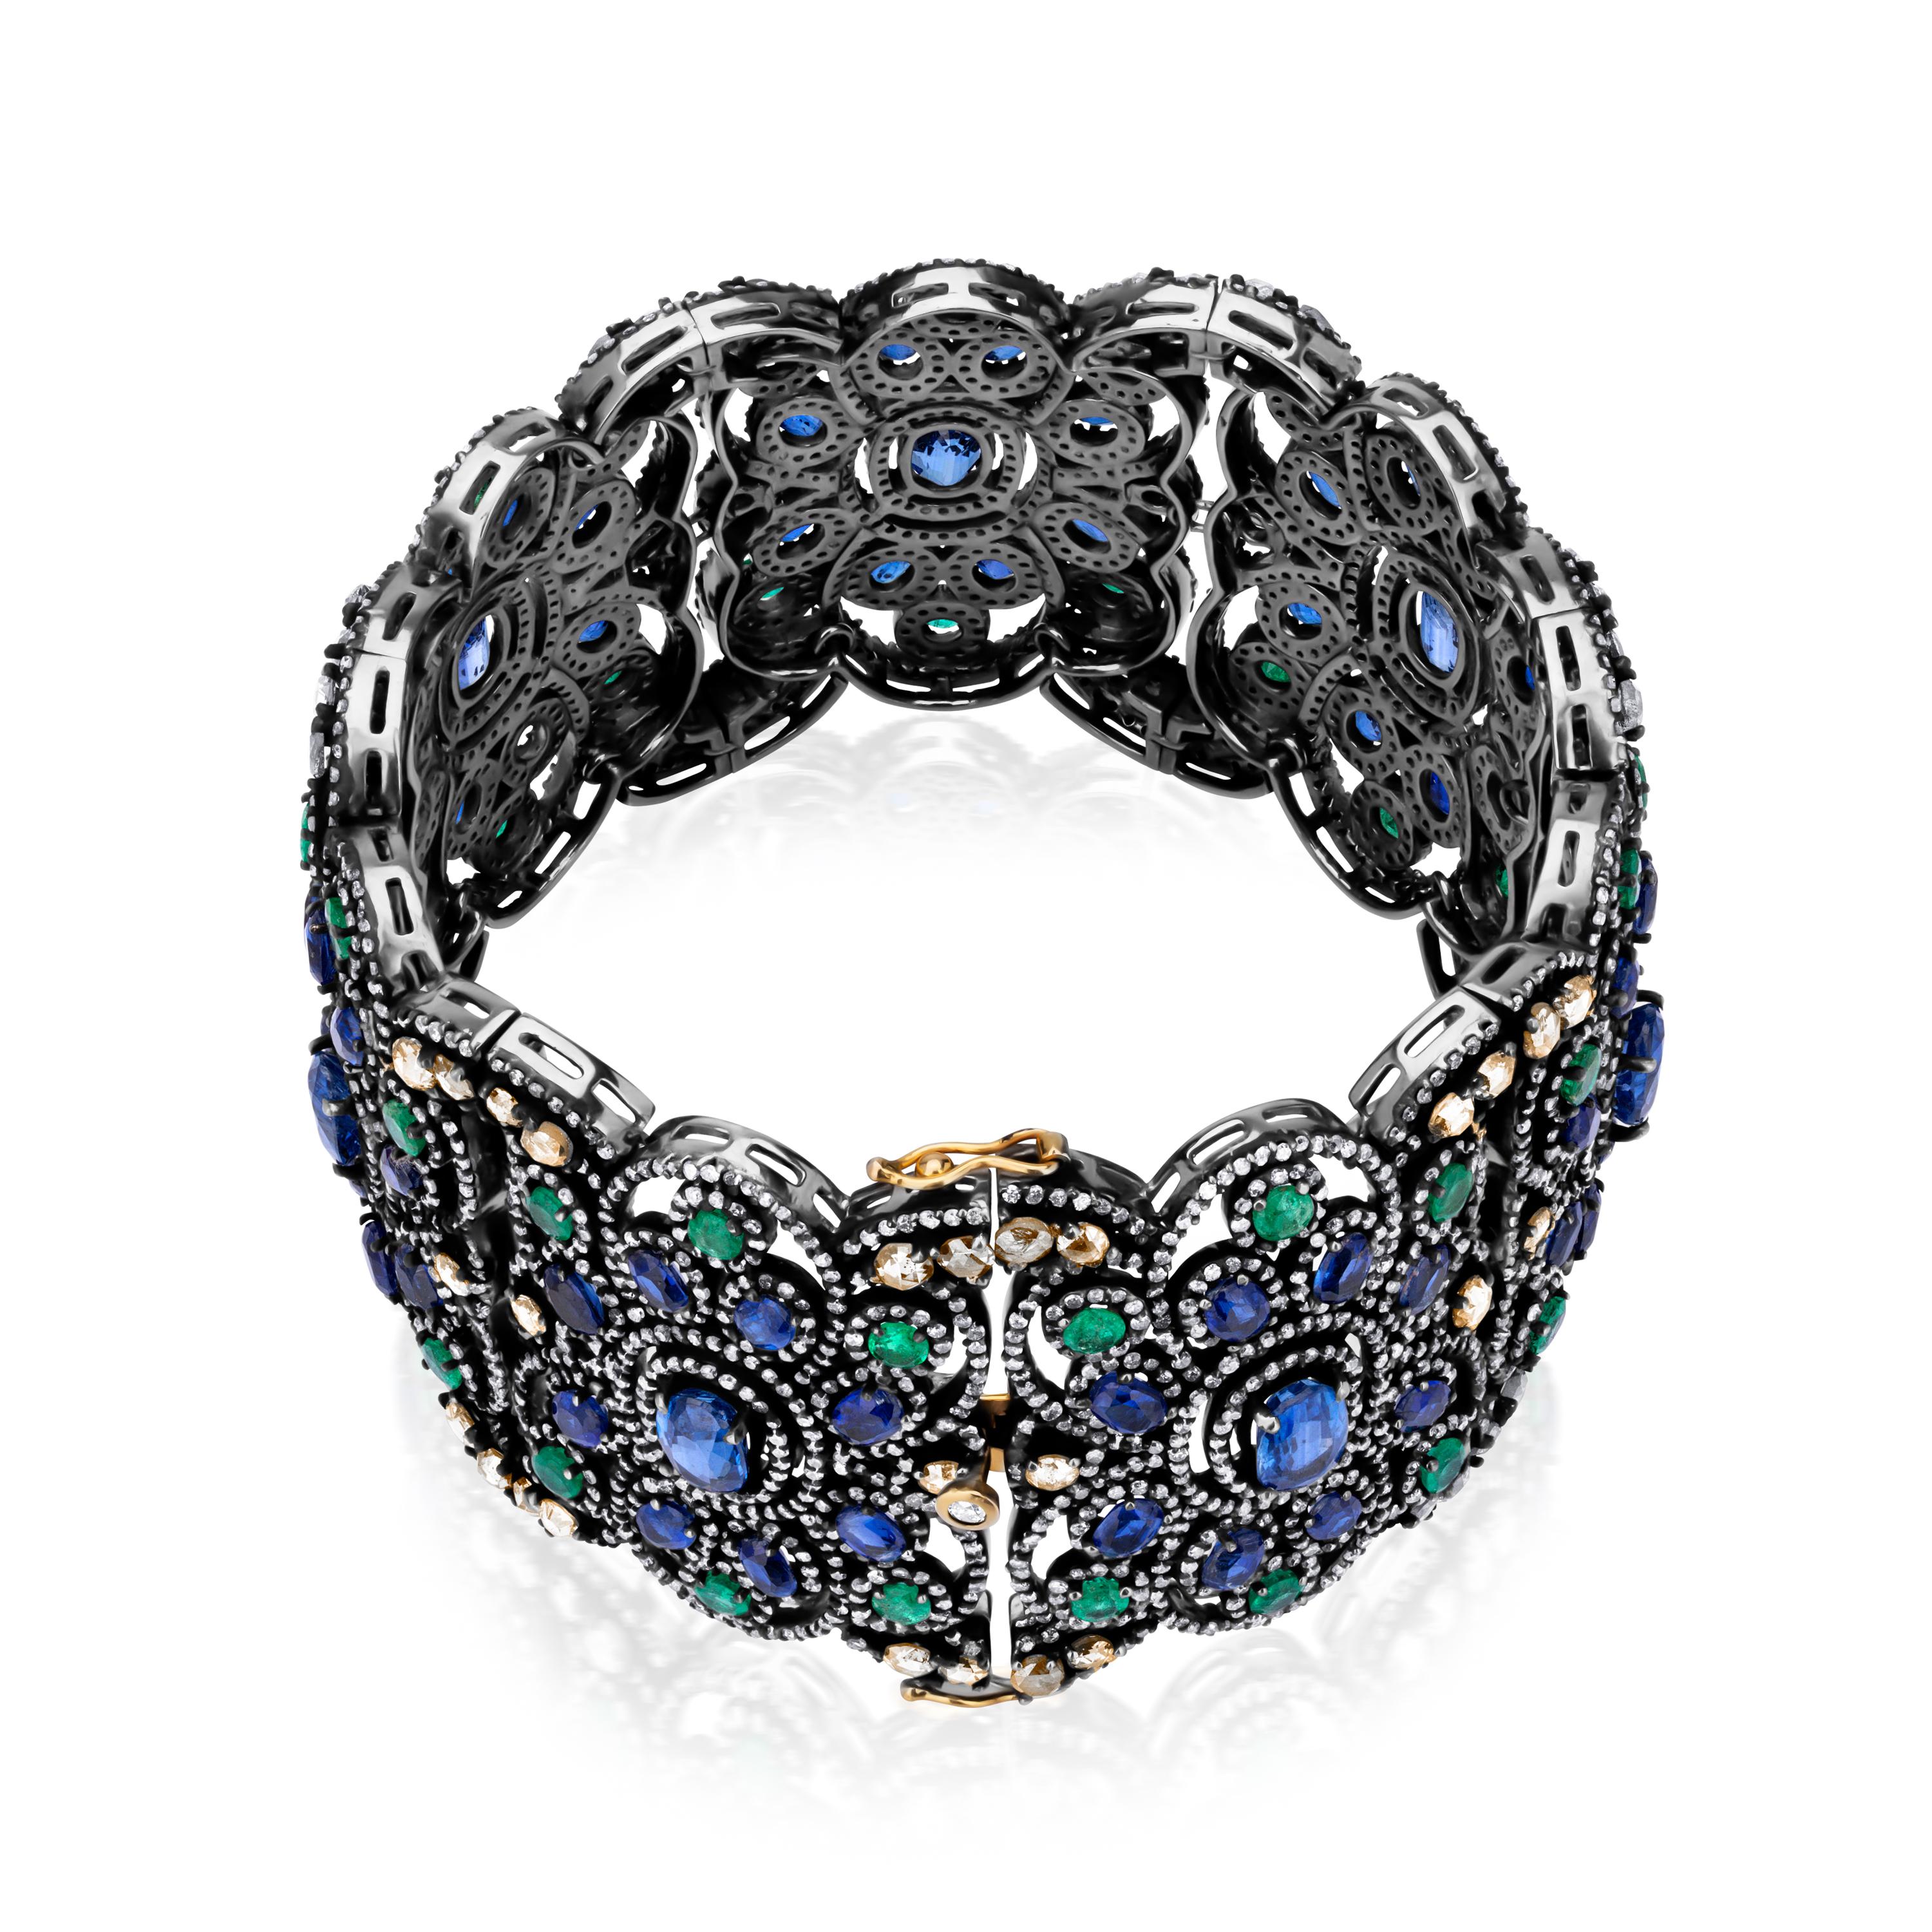 Oval Cut Victorian 42.5cttw. Diamonds, Kyanite and Emerald Floral Bracelet For Sale